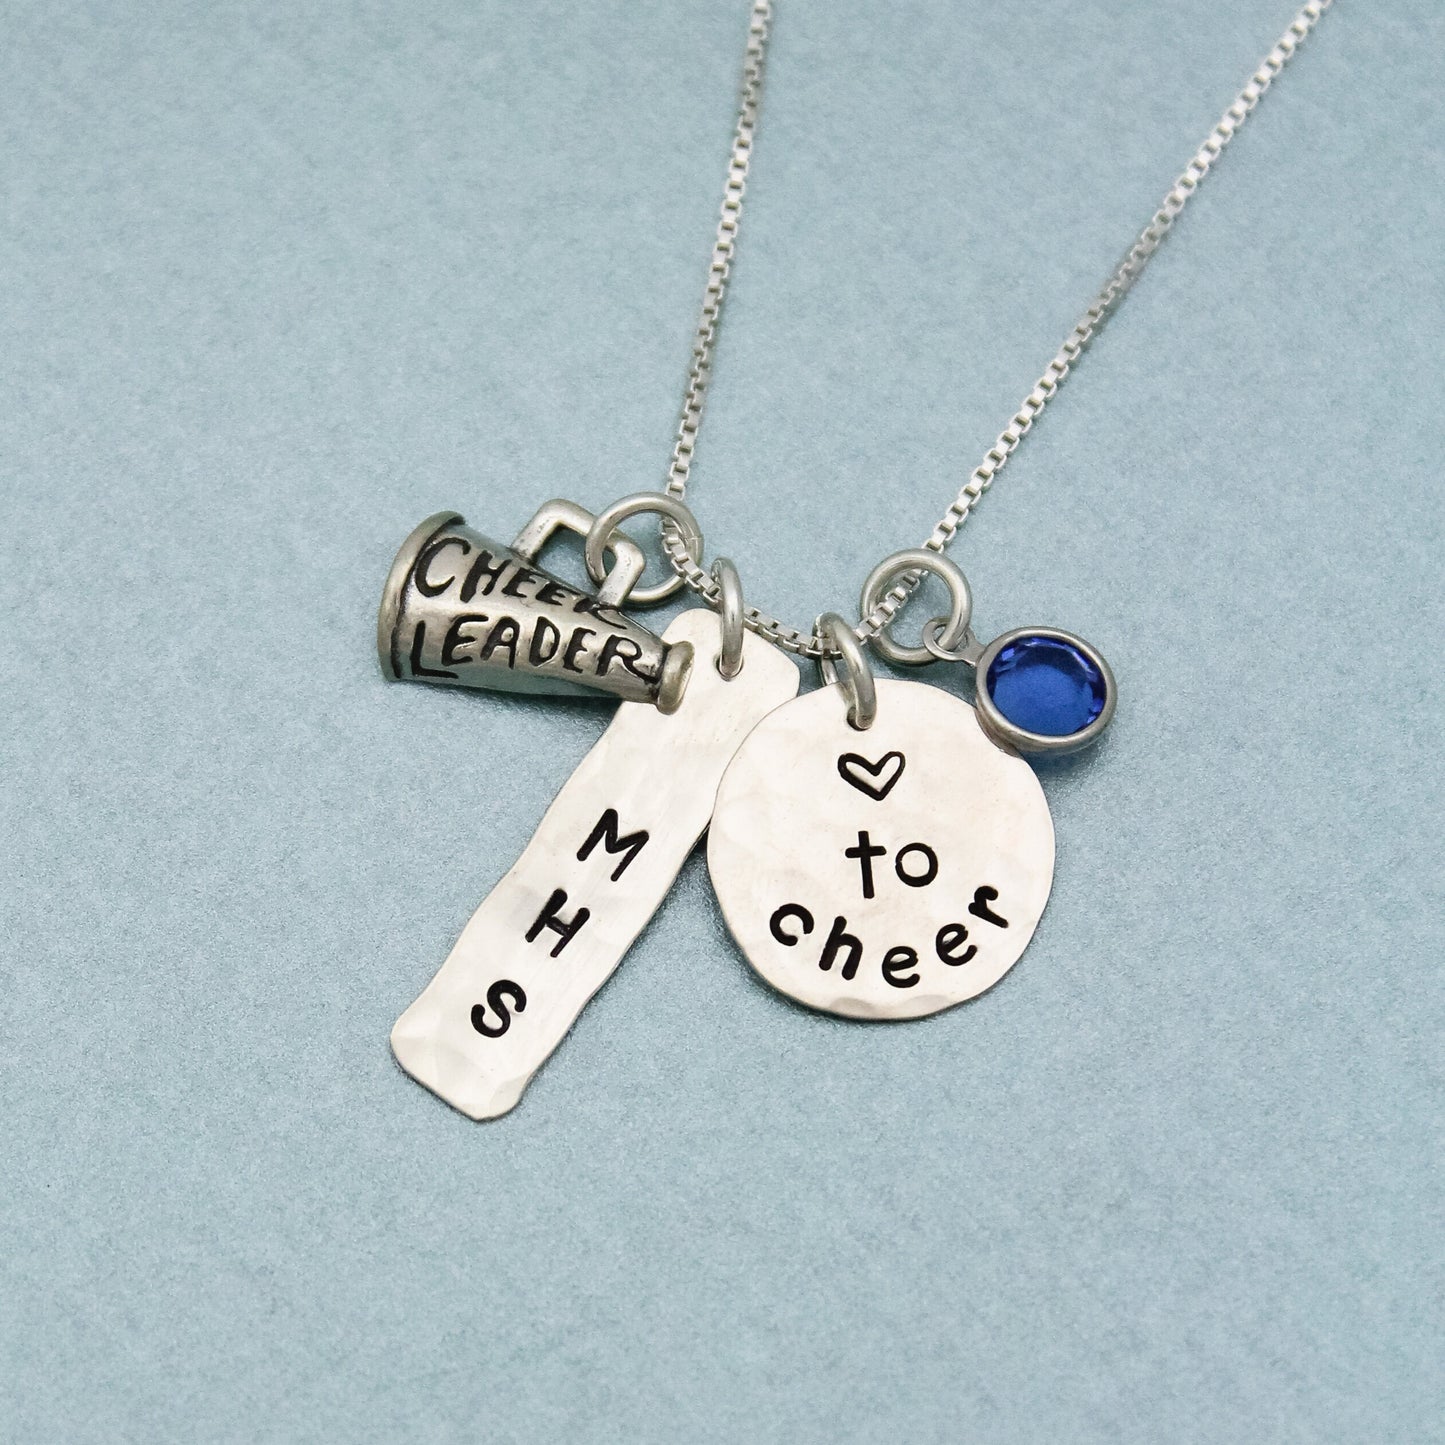 Personalized Cheerleading Necklace, Gifts for Cheerleaders, Cheer Mom Jewelry, Love to Cheer Necklace, Cheerleader Gift, Pepsquad Gift